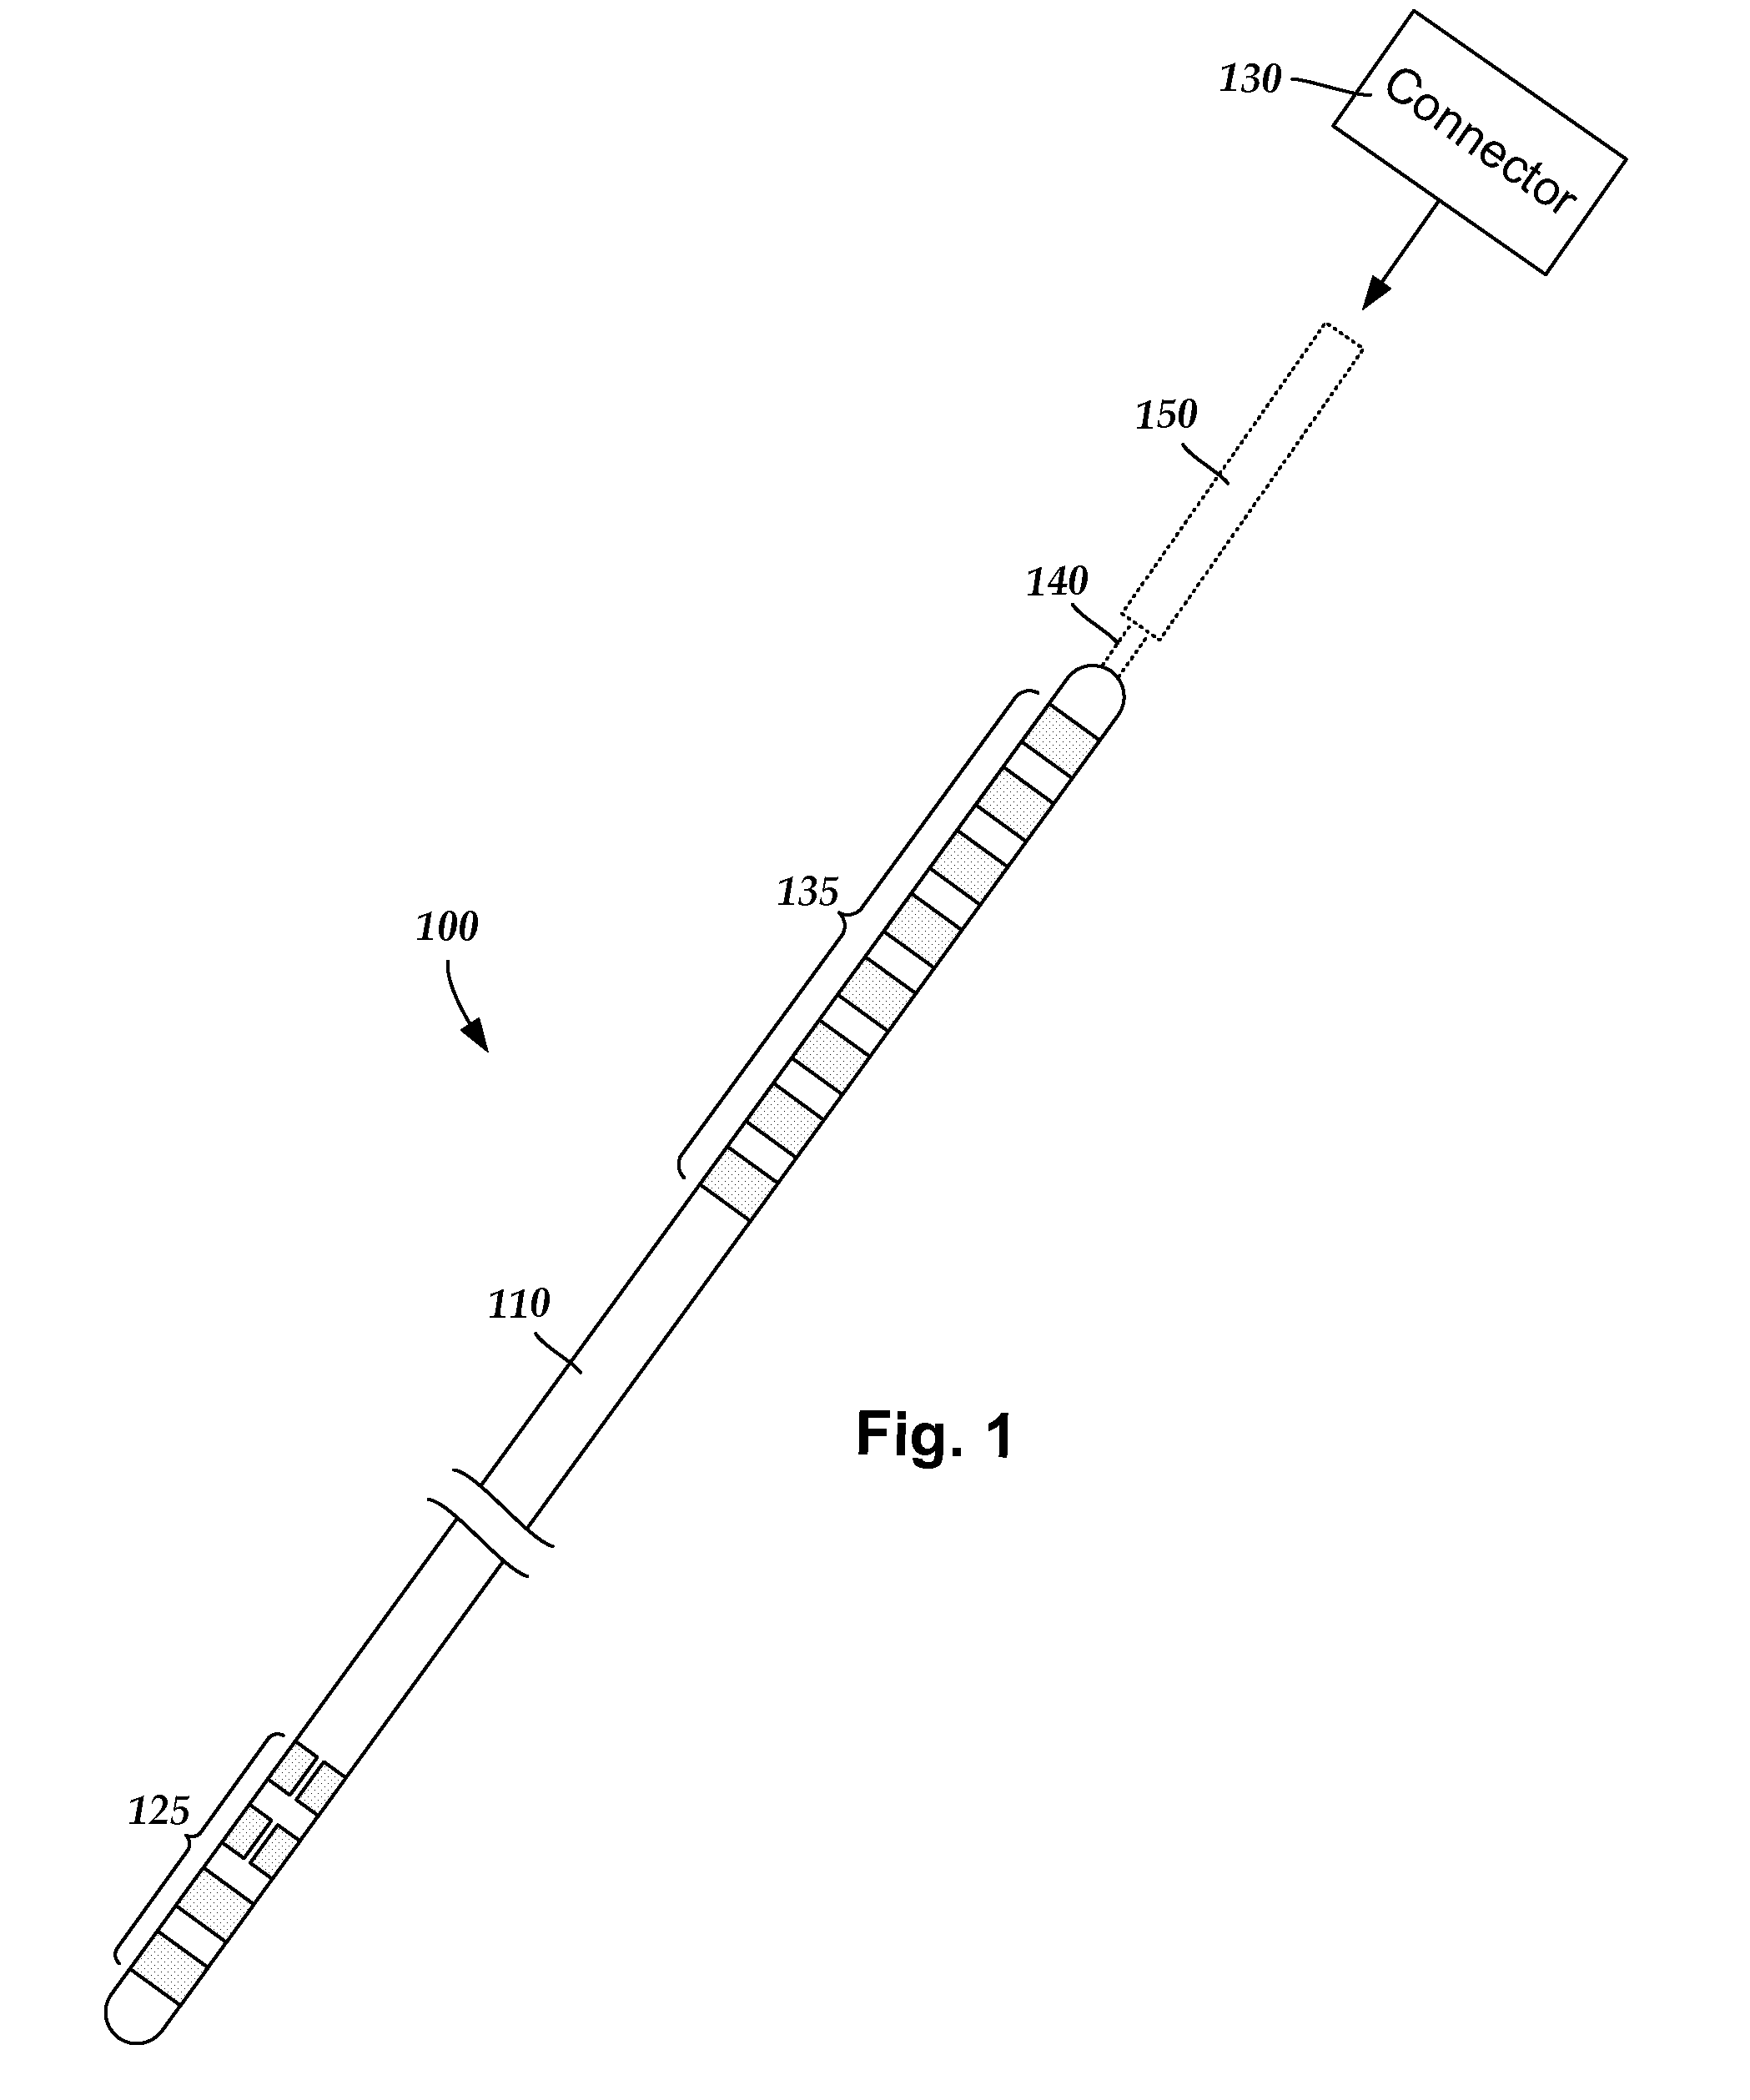 Systems and methods for making and using radially-aligned segmented electrodes for leads of electrical stimulation systems